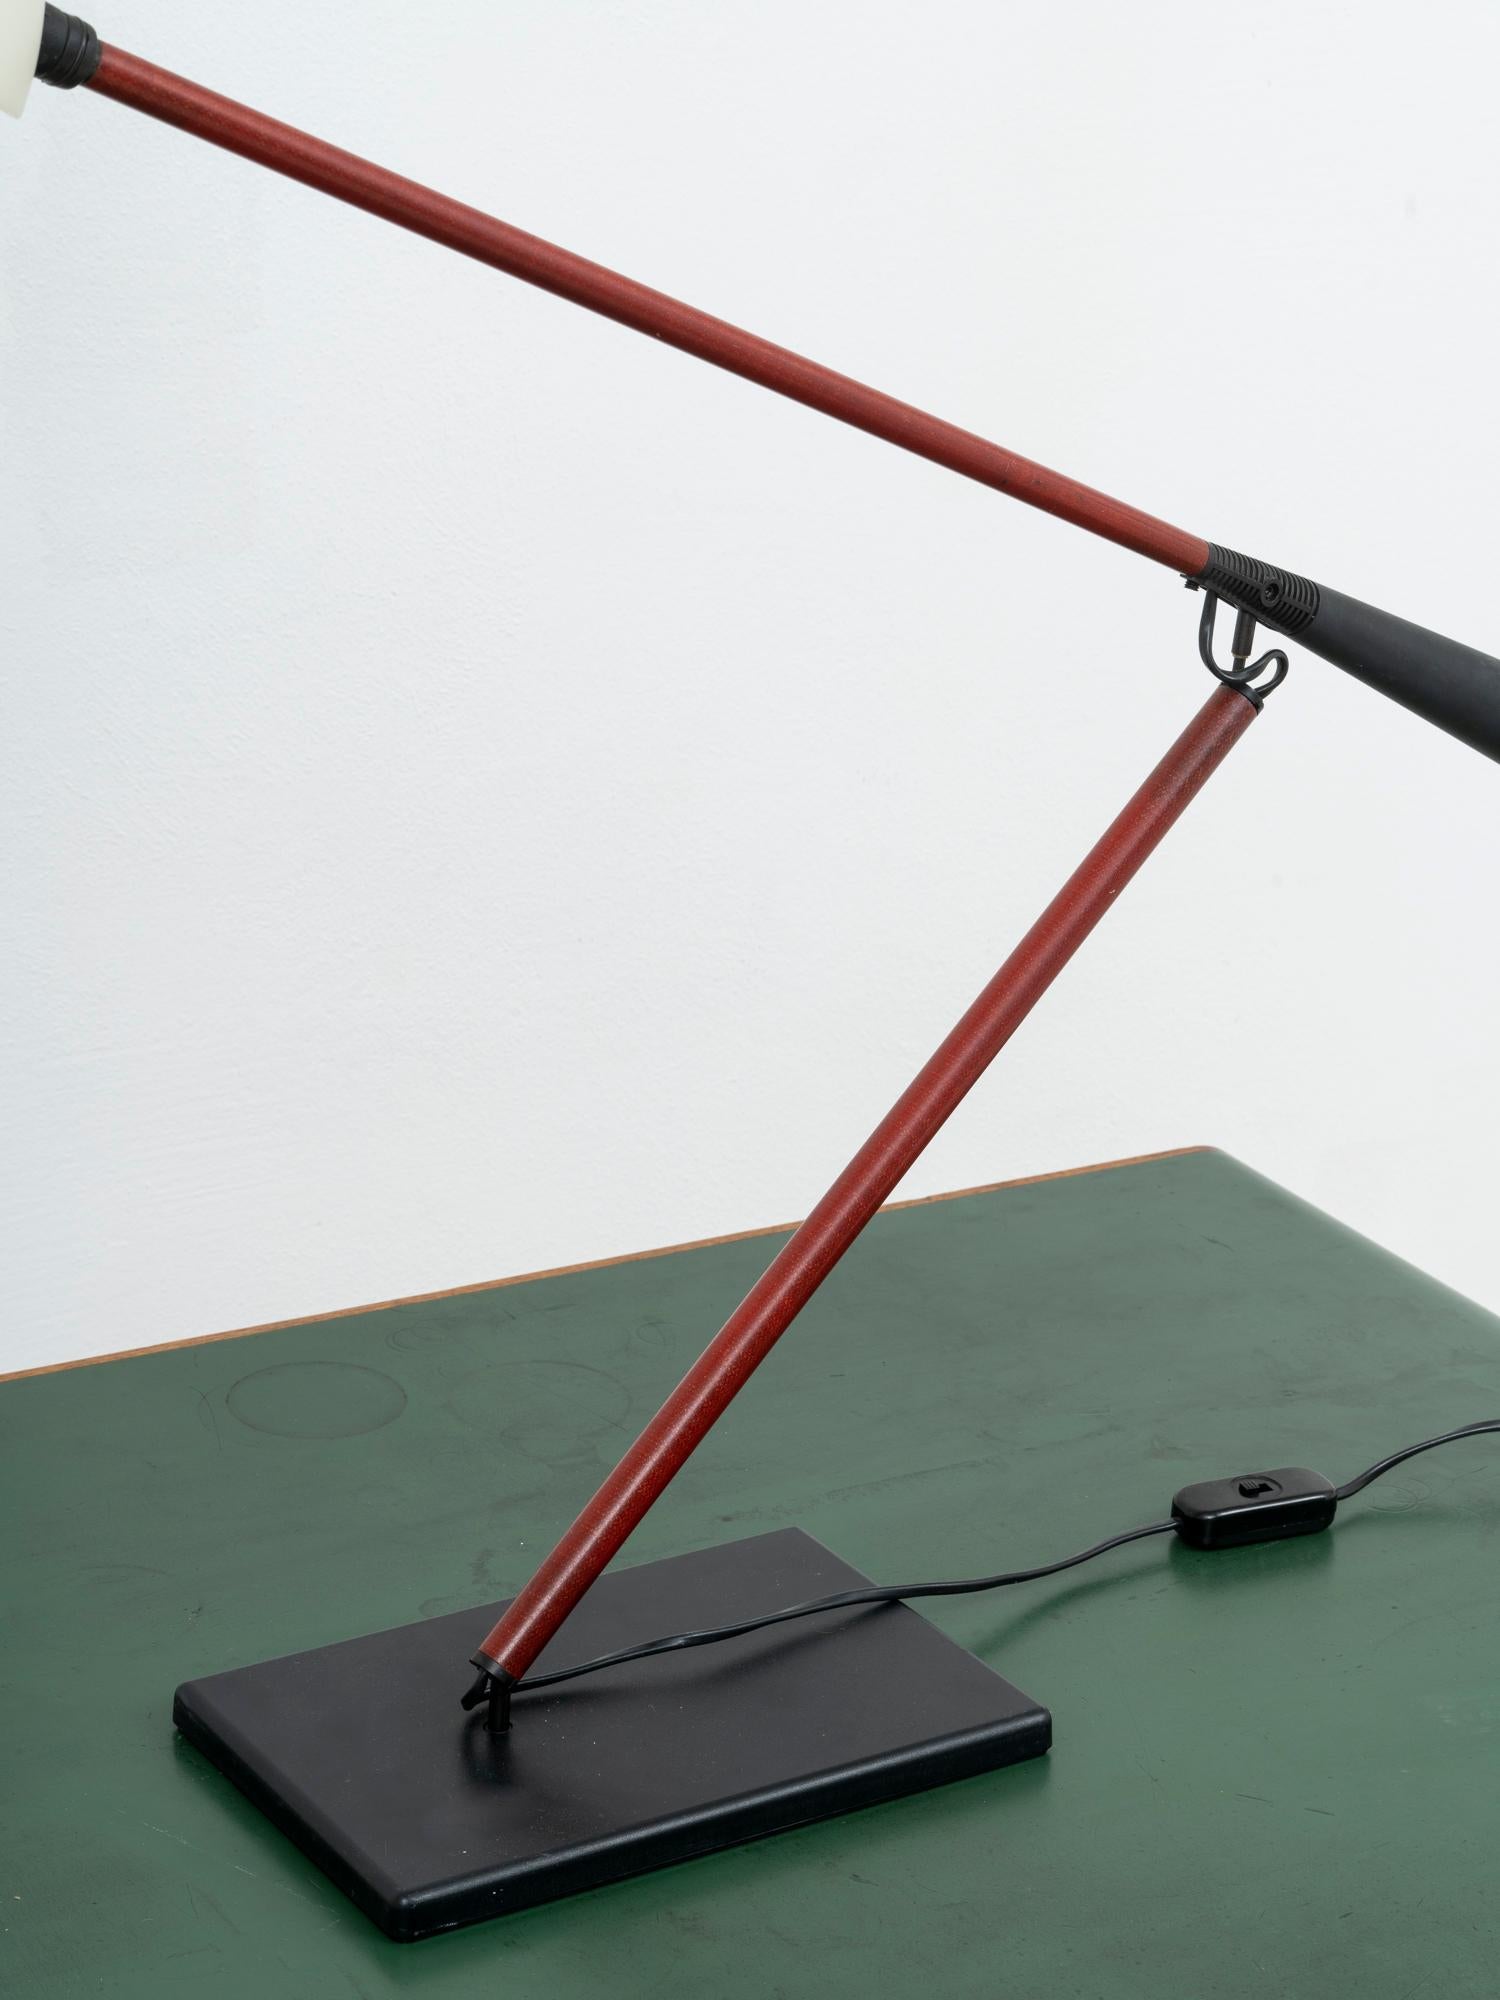 Minimalistic Mod. 613 Articulating Desk Lamp by Paolo Rizzatto for Arteluce 1975 In Good Condition For Sale In Koper, SI